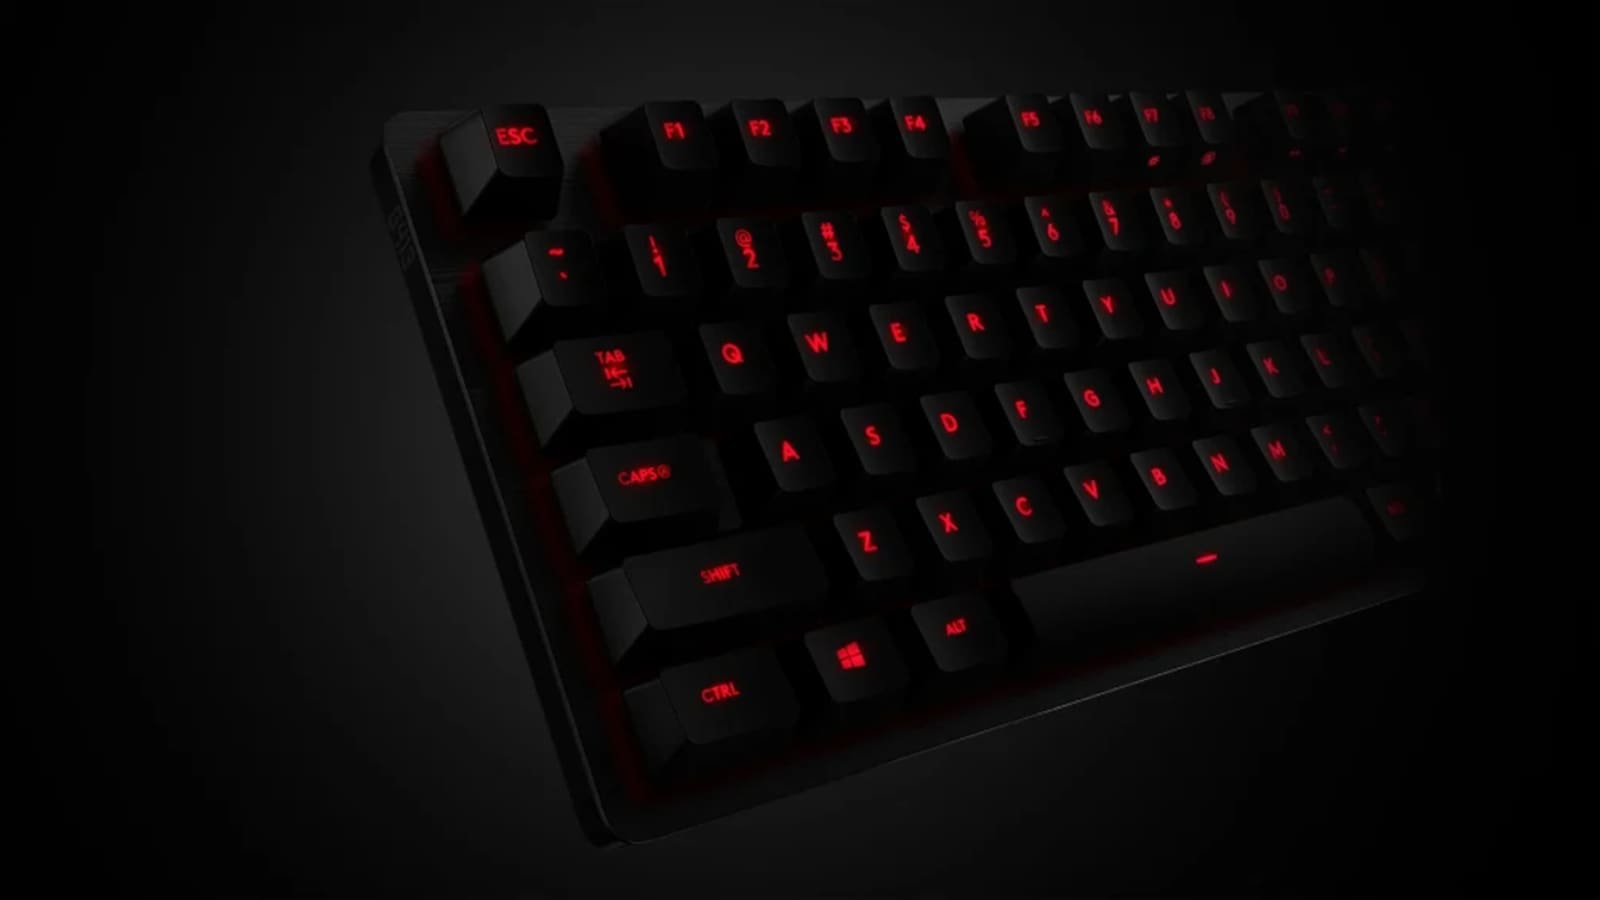 Logitech G413 SE, G413 TKL SE Mechanical Gaming Keyboards Launched in  India: All the Details